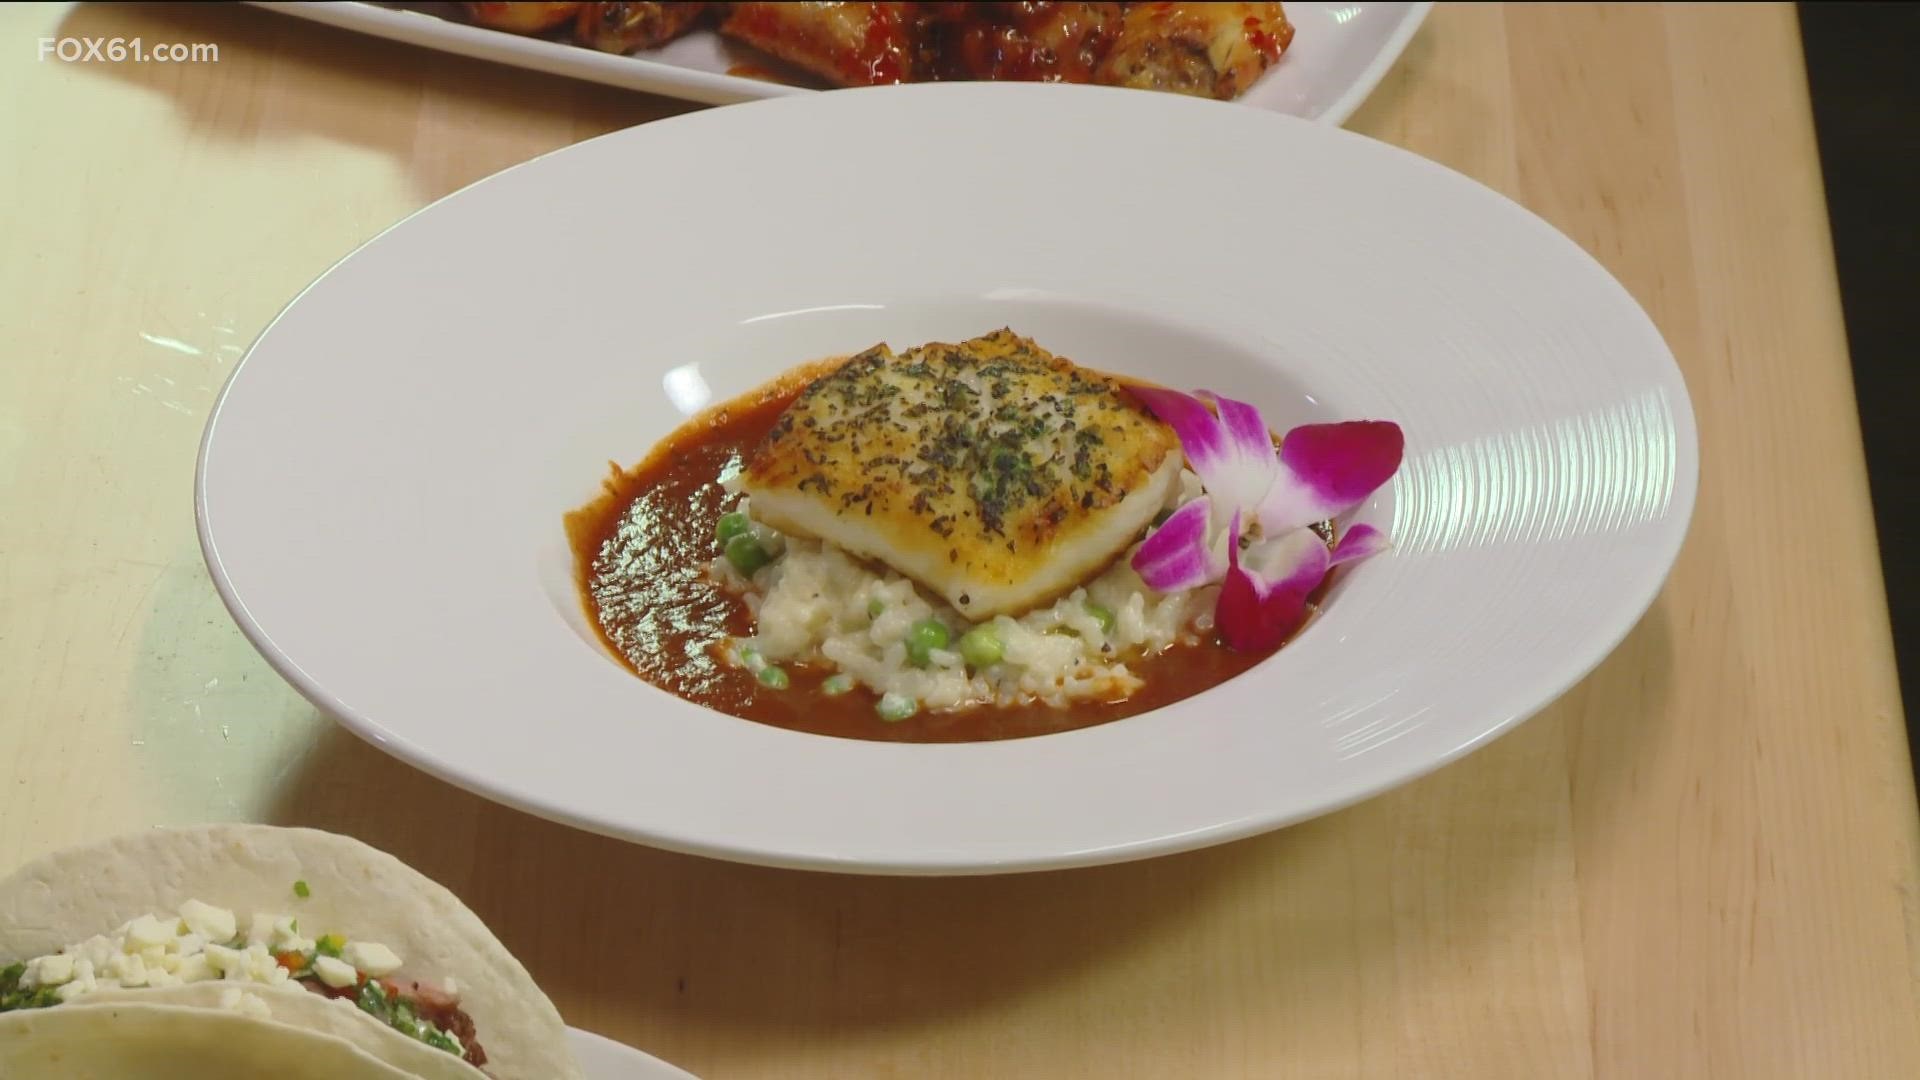 Chef Anthony Pellegrini of Guilford Mooring shows us some good eats you can make for the big game.